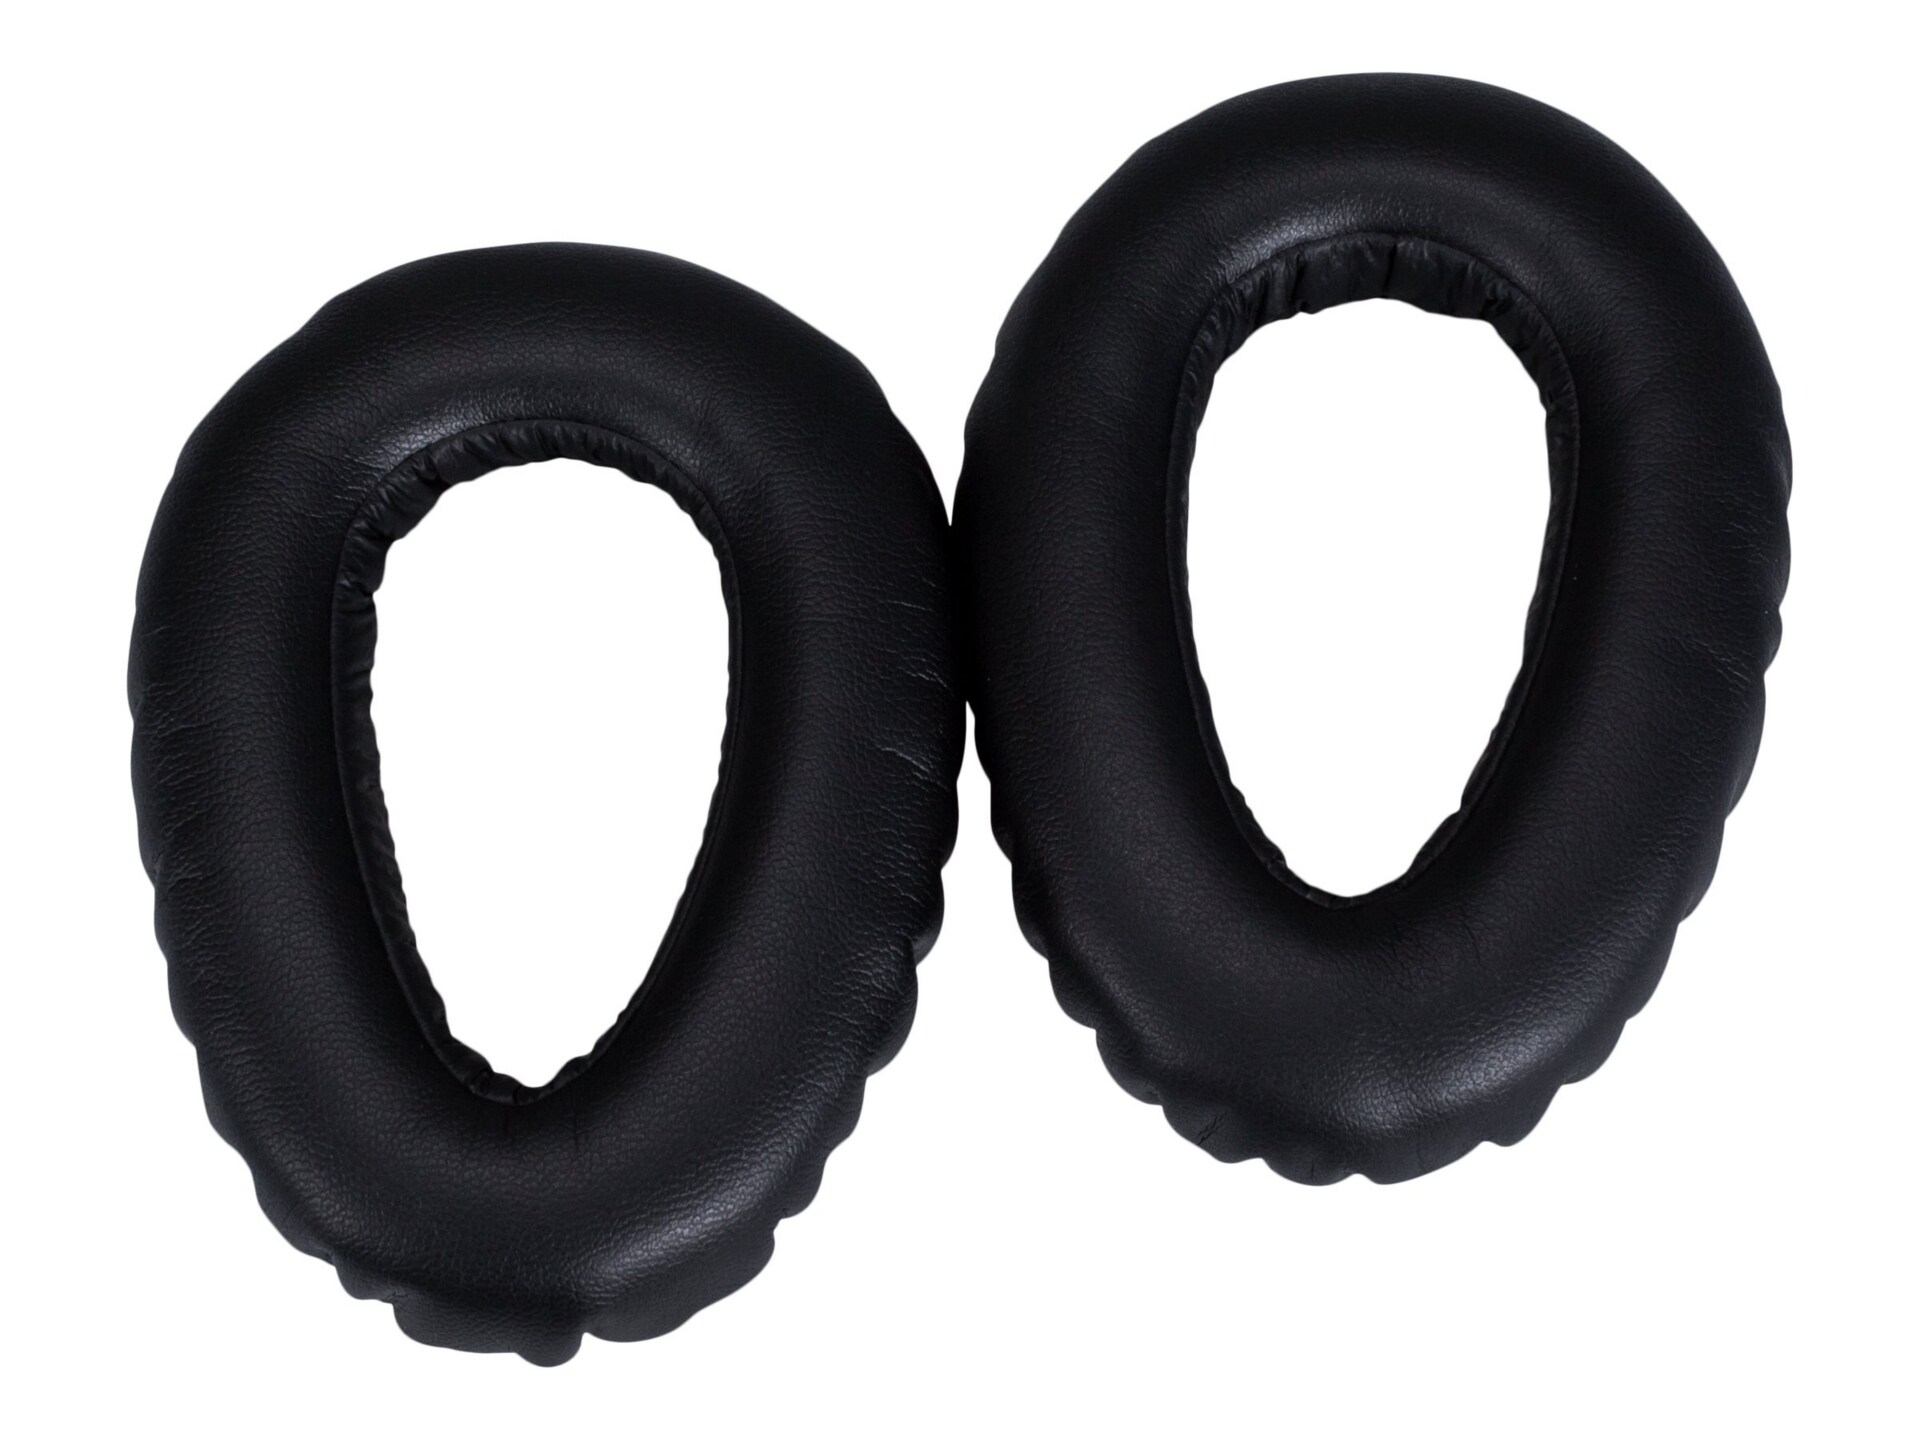 EPOS - earpads for headset